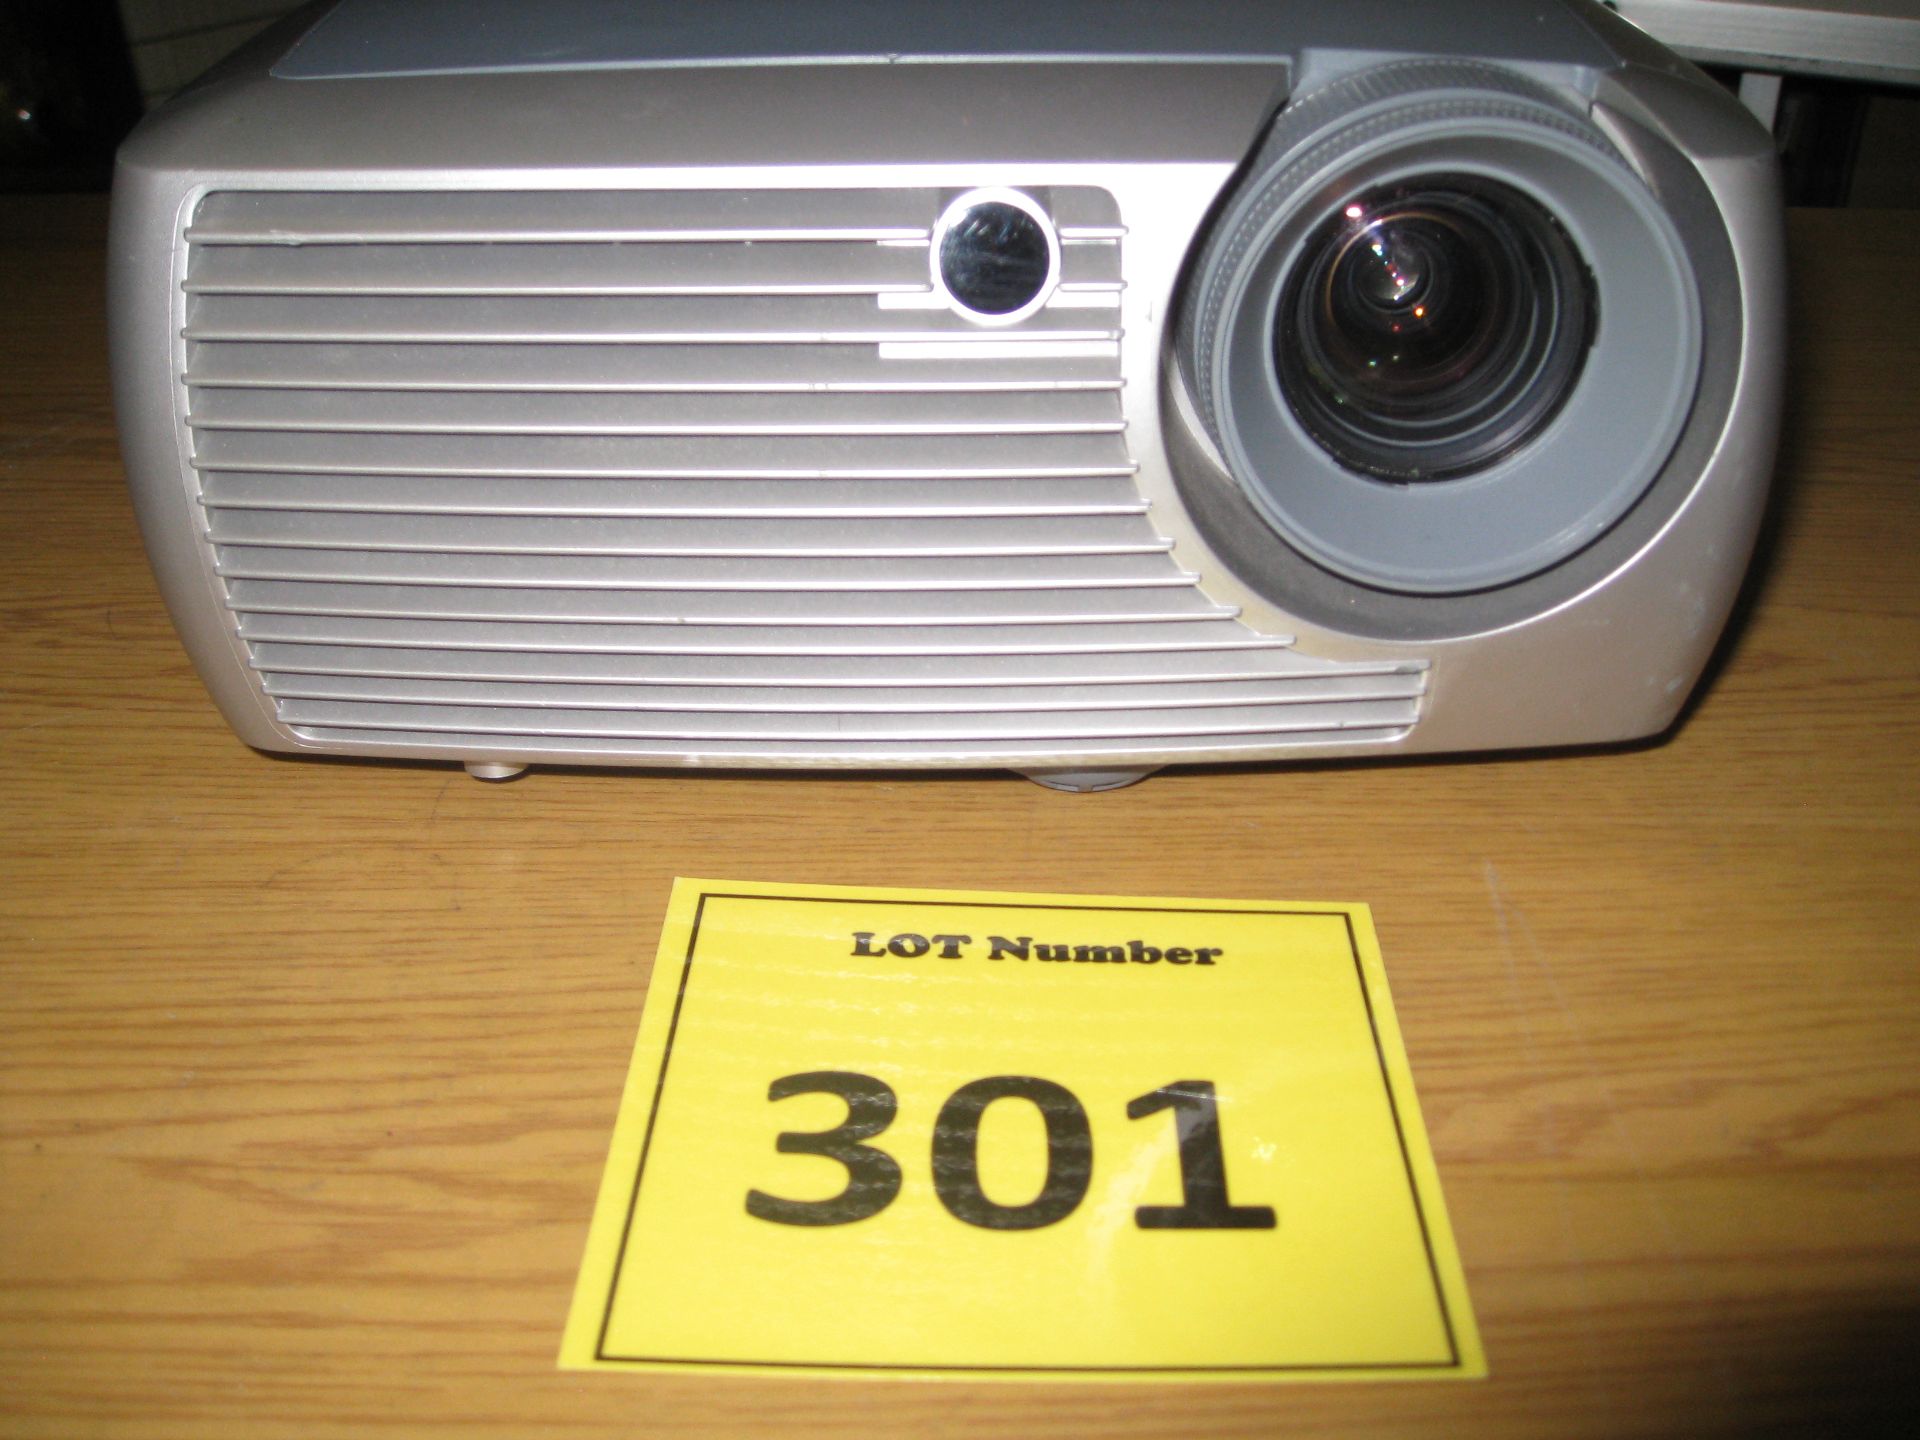 SCREENPLAY 4800 PROJECTOR. SHOWING 2330 HOURS